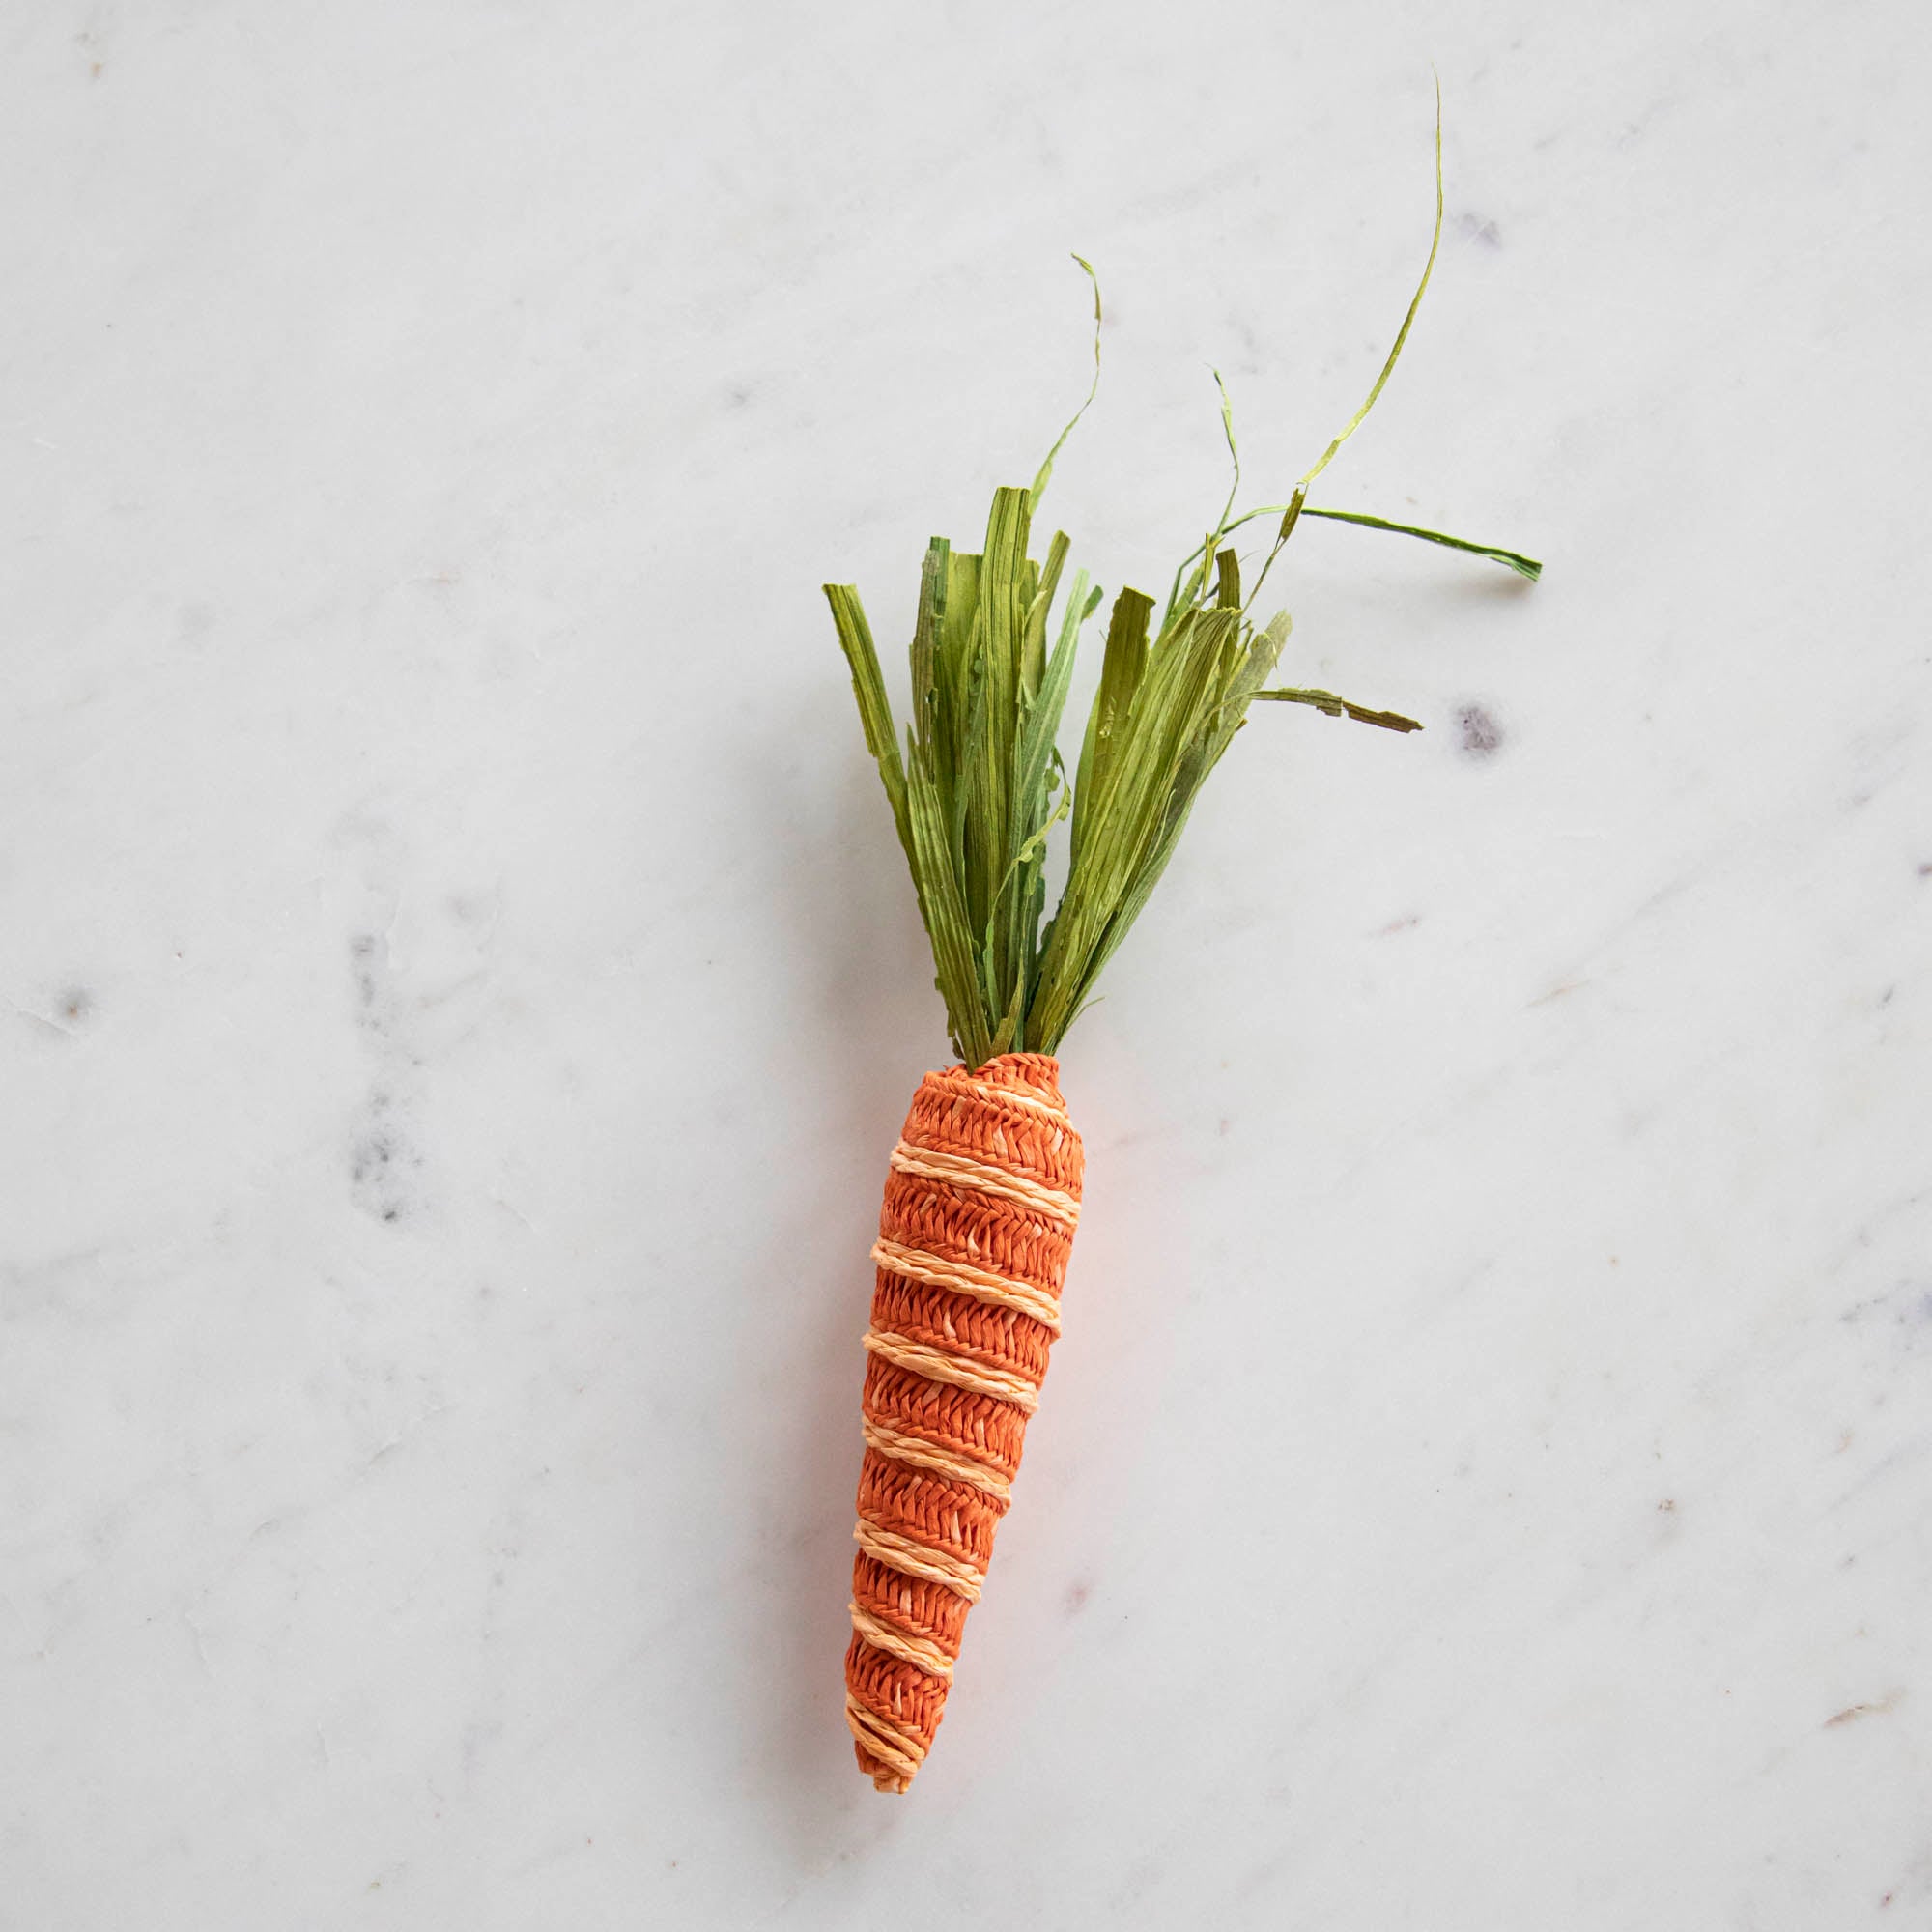 A Glitterville knitted Natural Carrot on a marble surface, perfect for Easter baskets or table settings.